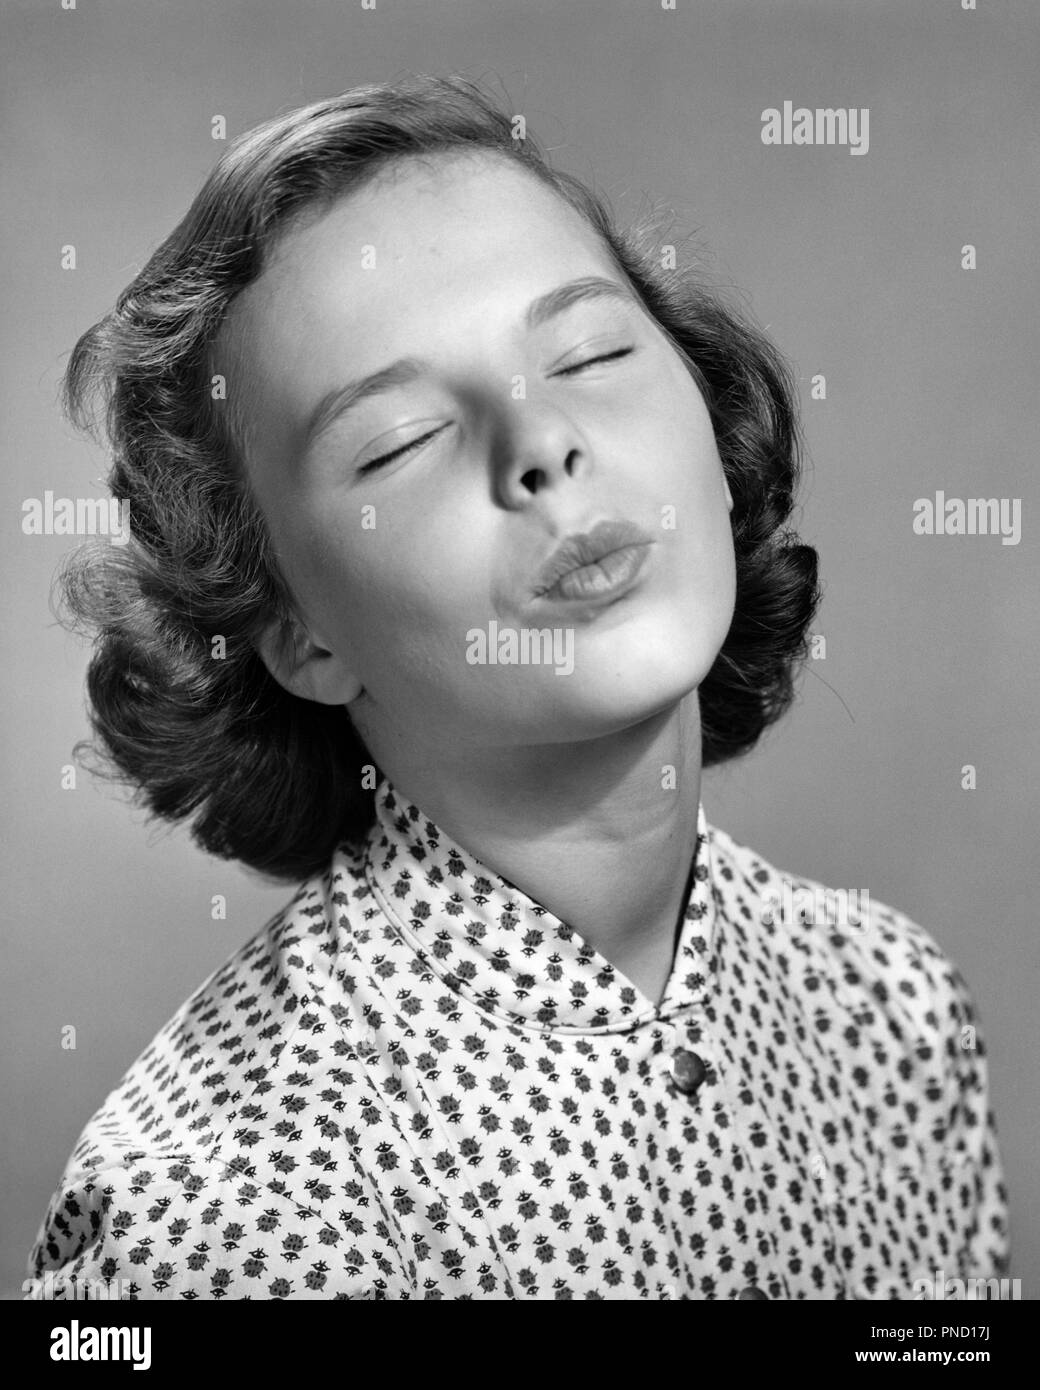 Pucker up Black and White Stock Photos & Images - Alamy